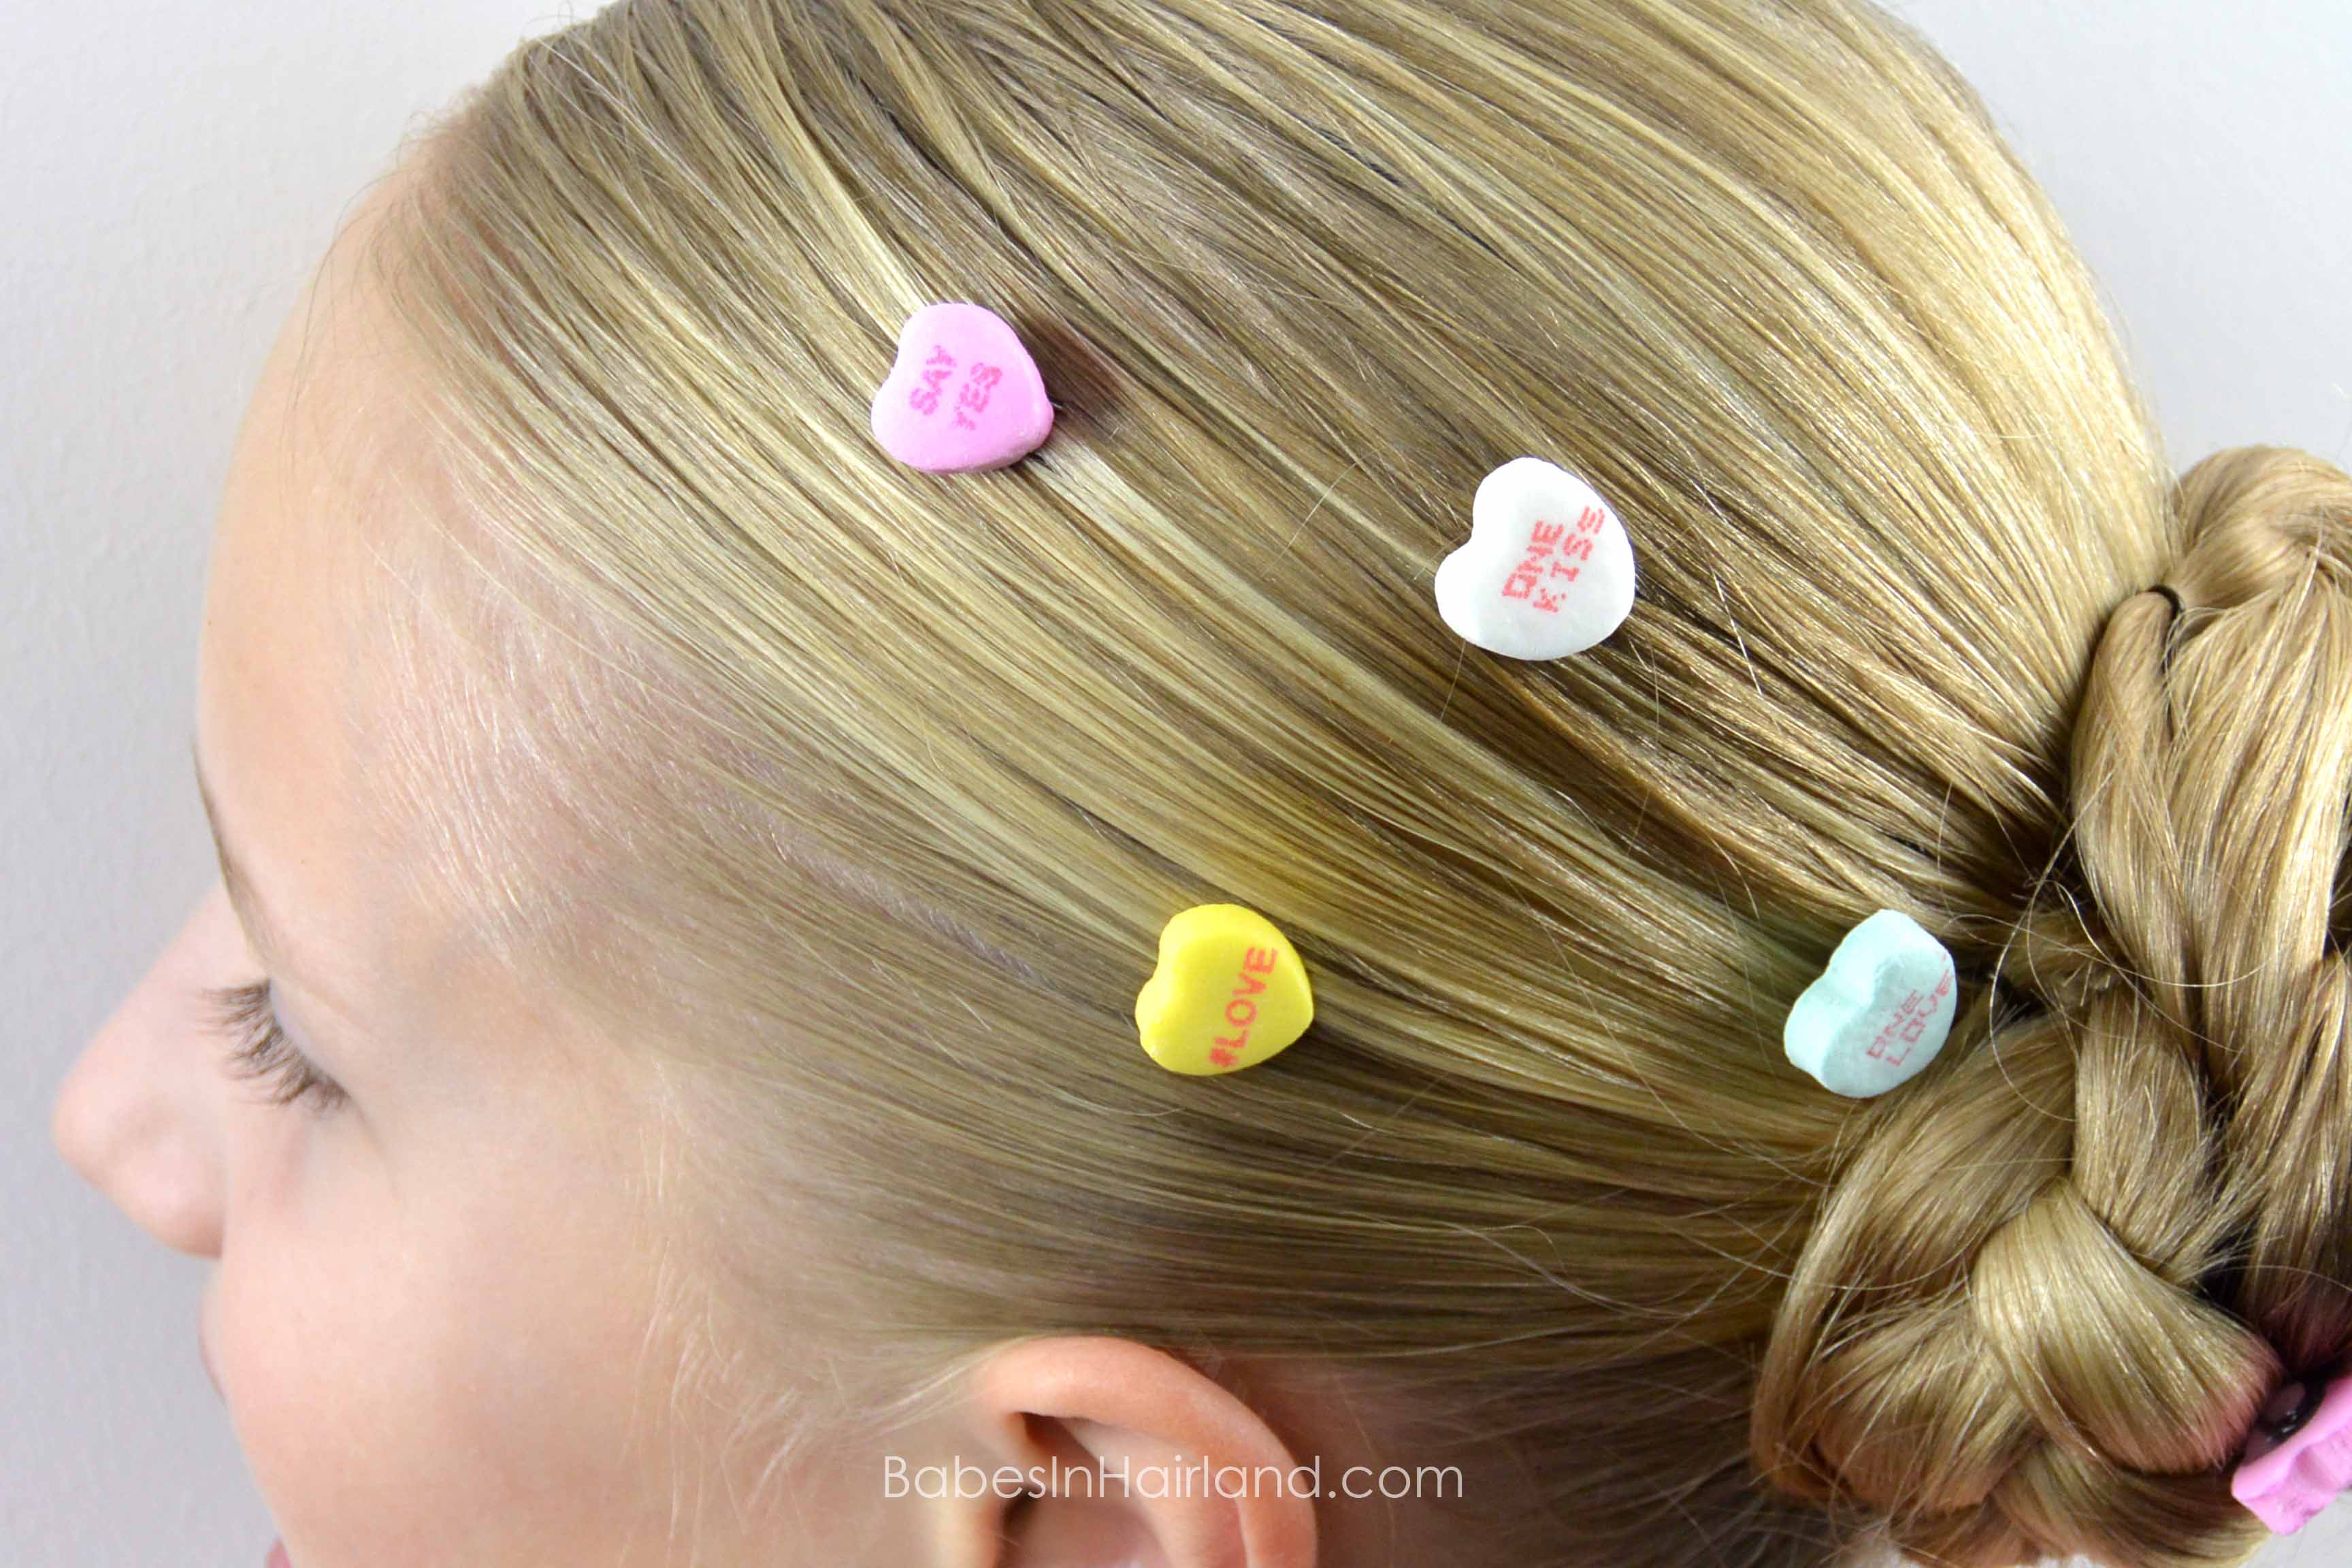 Diy Candy Heart Hair Accessories For Valentines Day Babes In Hairland